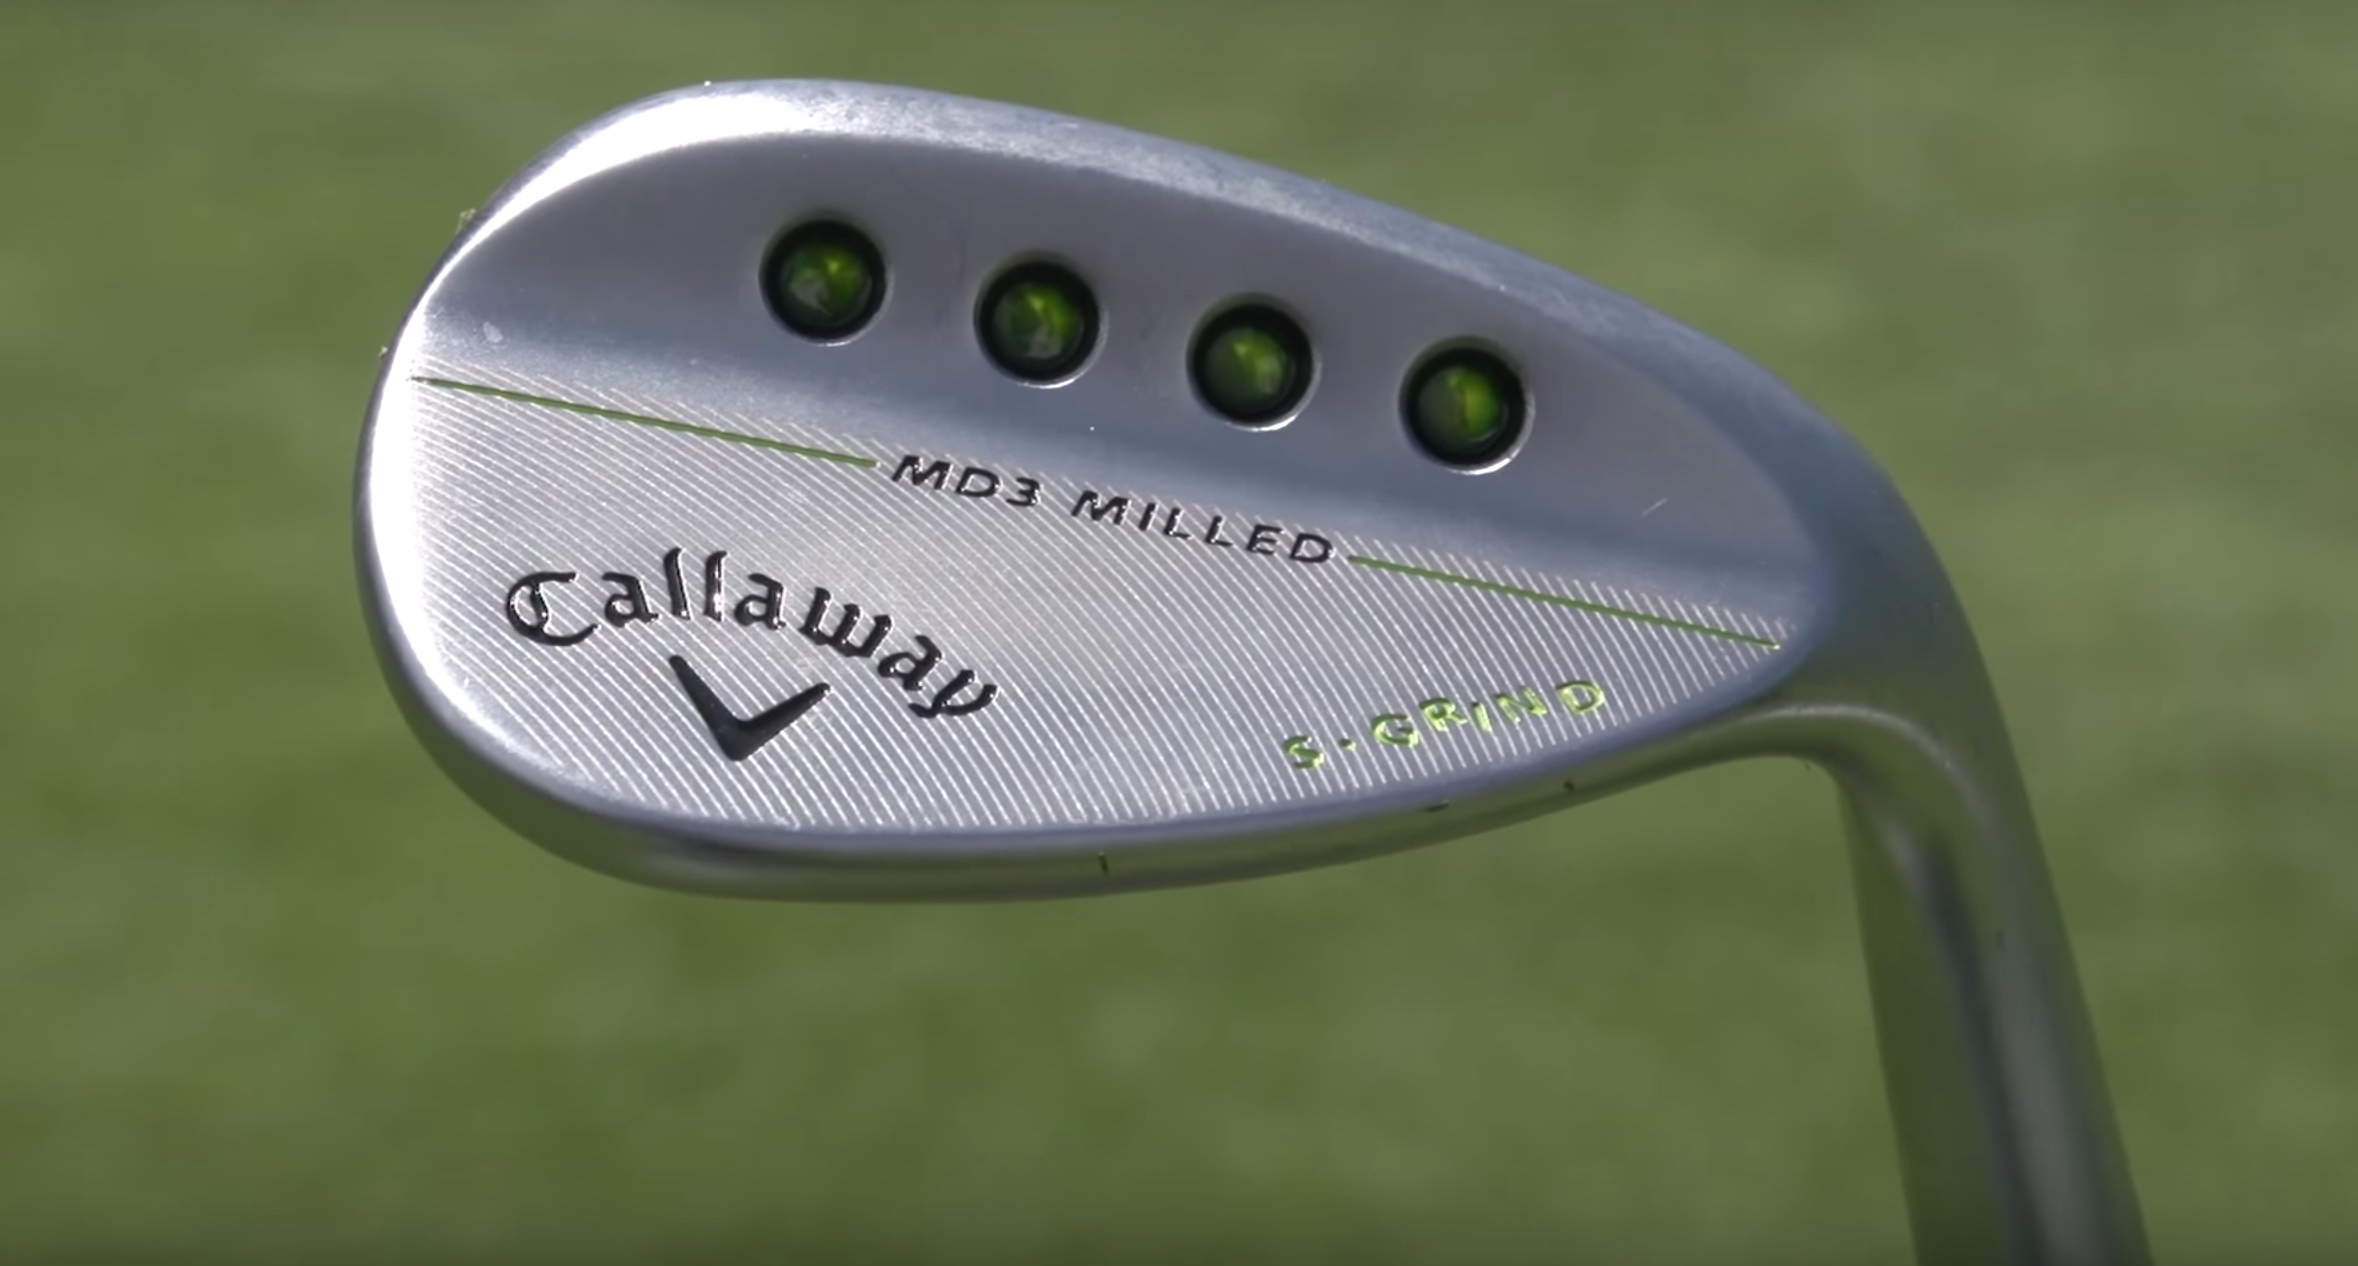 The 7 Best Golf Wedges of 2020 Best Golf Wedges for Seniors Reviews The 3 B...